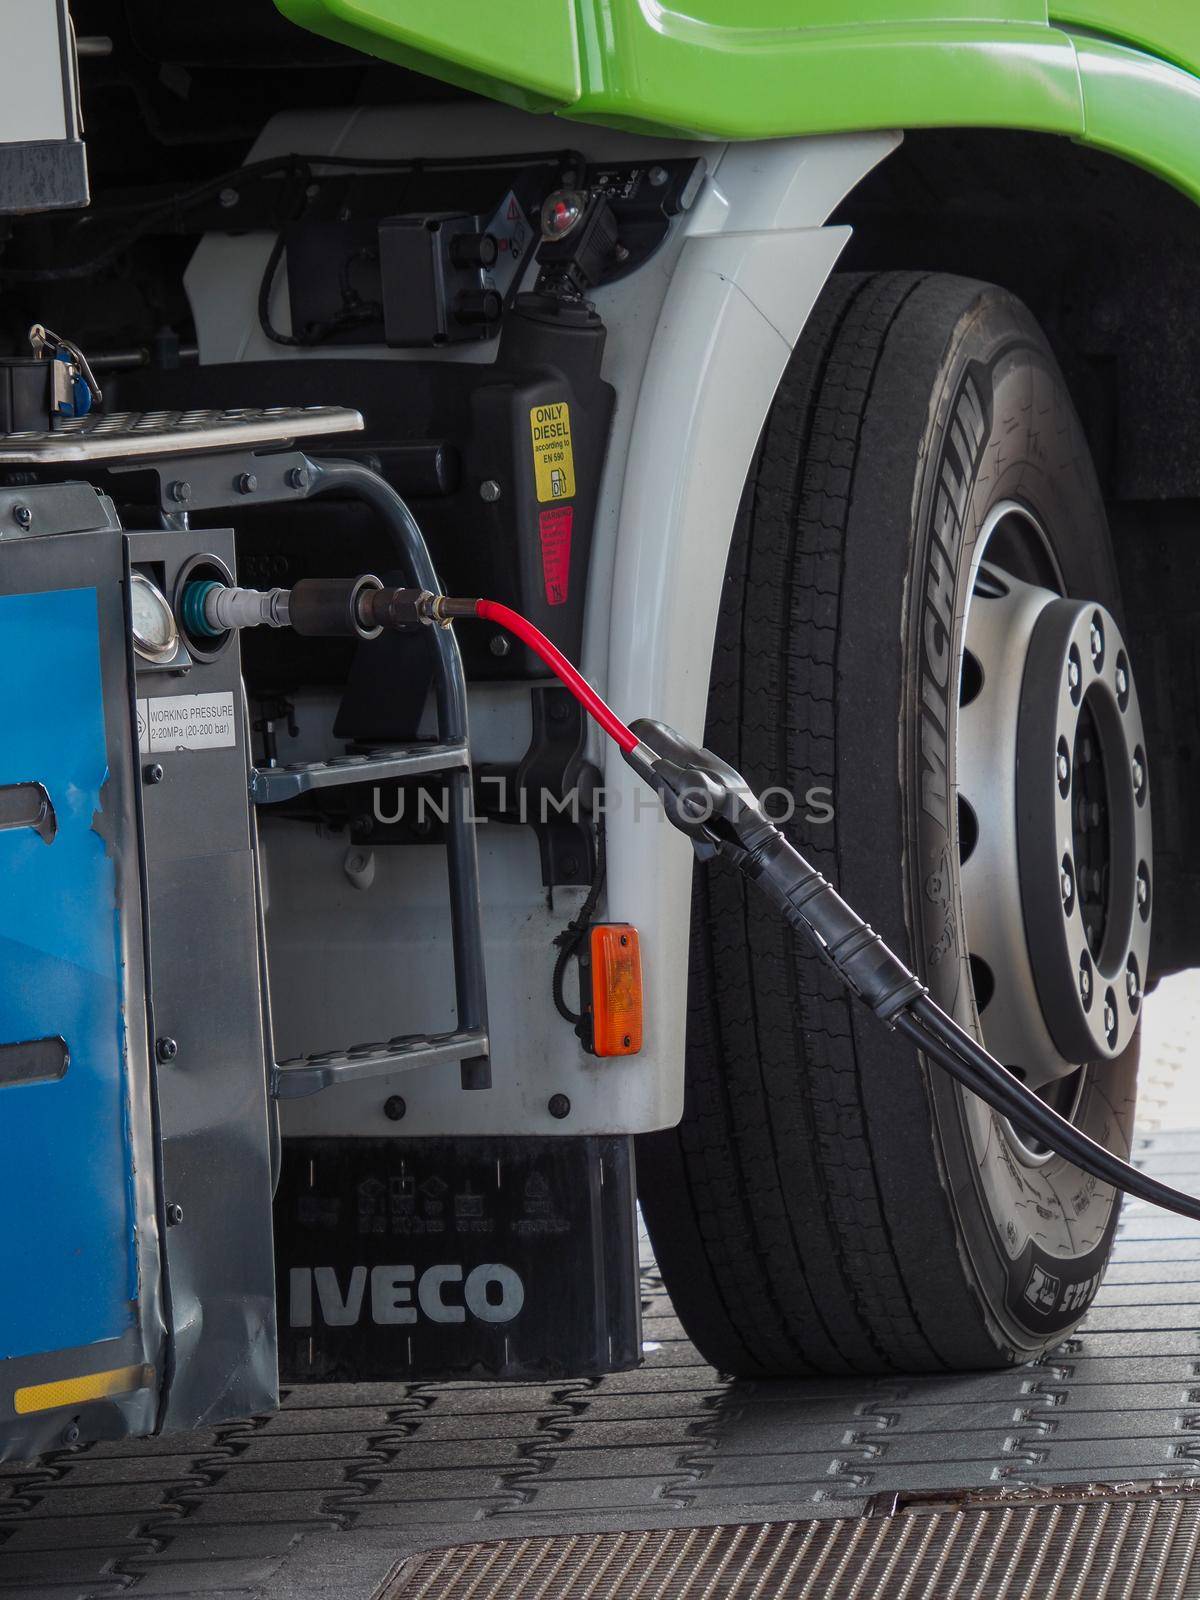 Caorso, Italy - September 2022 Cars being charged at LPG gas stations by verbano